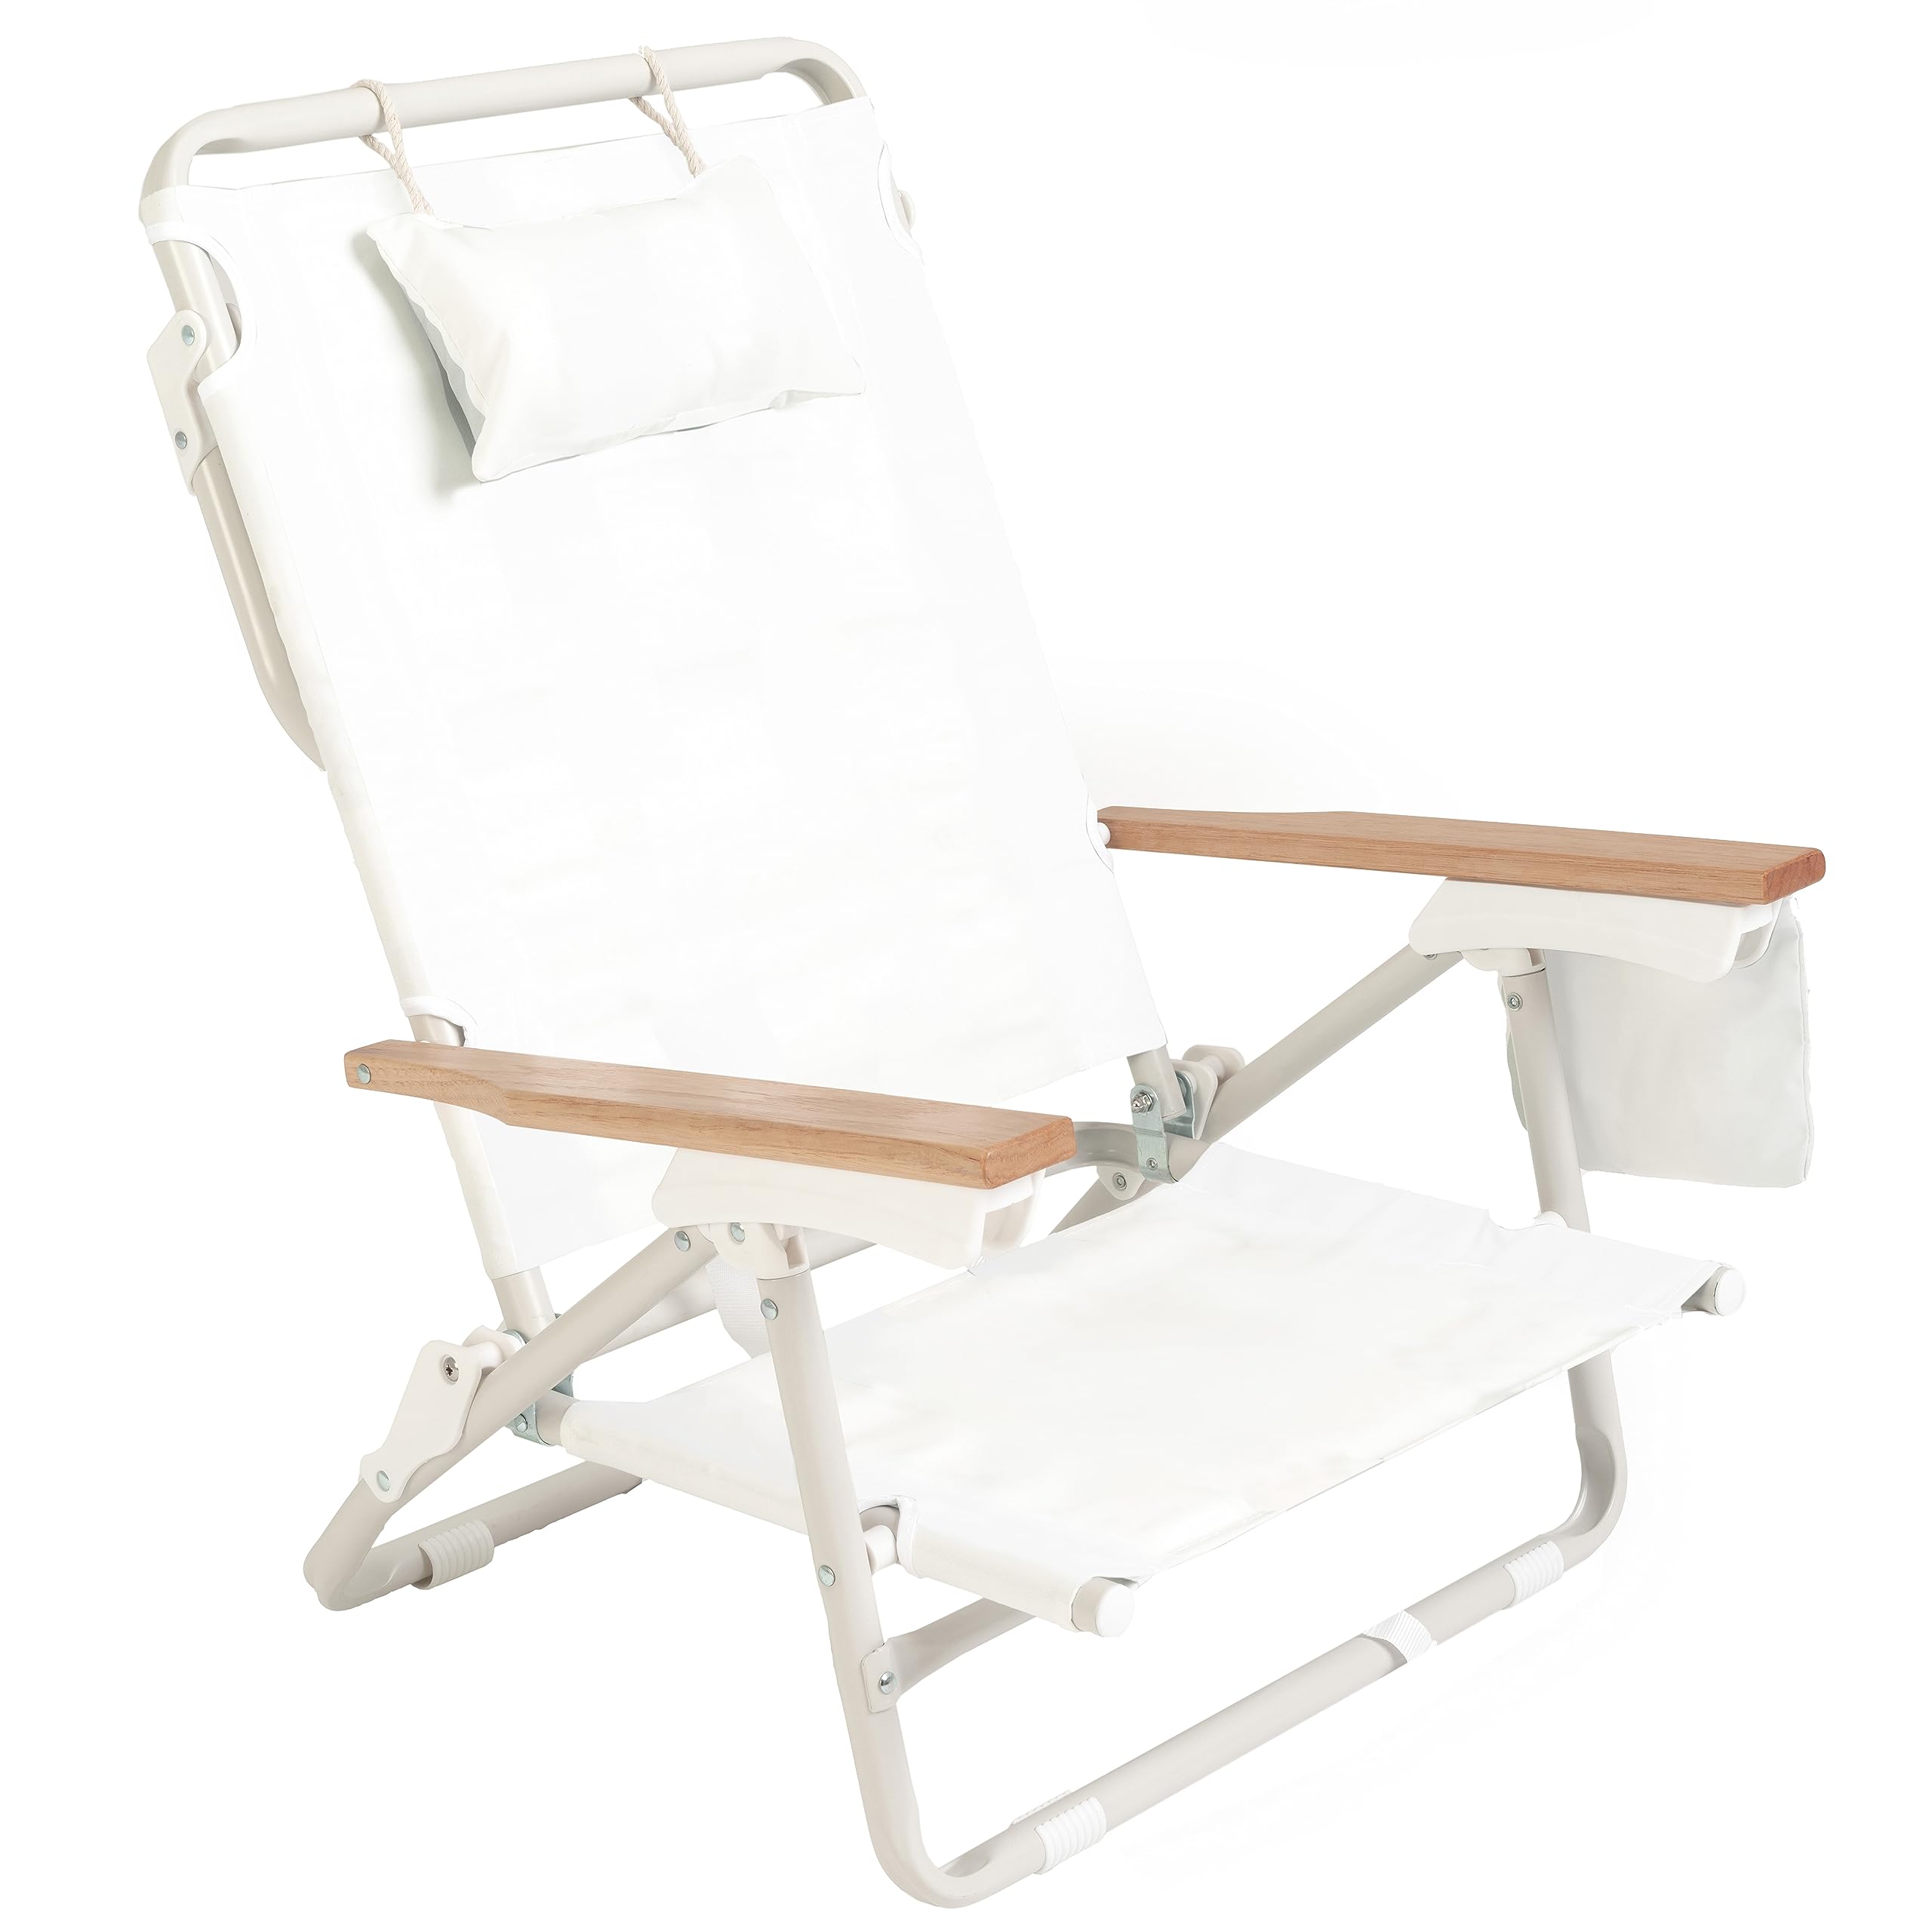 Business & Pleasure Co. Holiday Tommy Chair